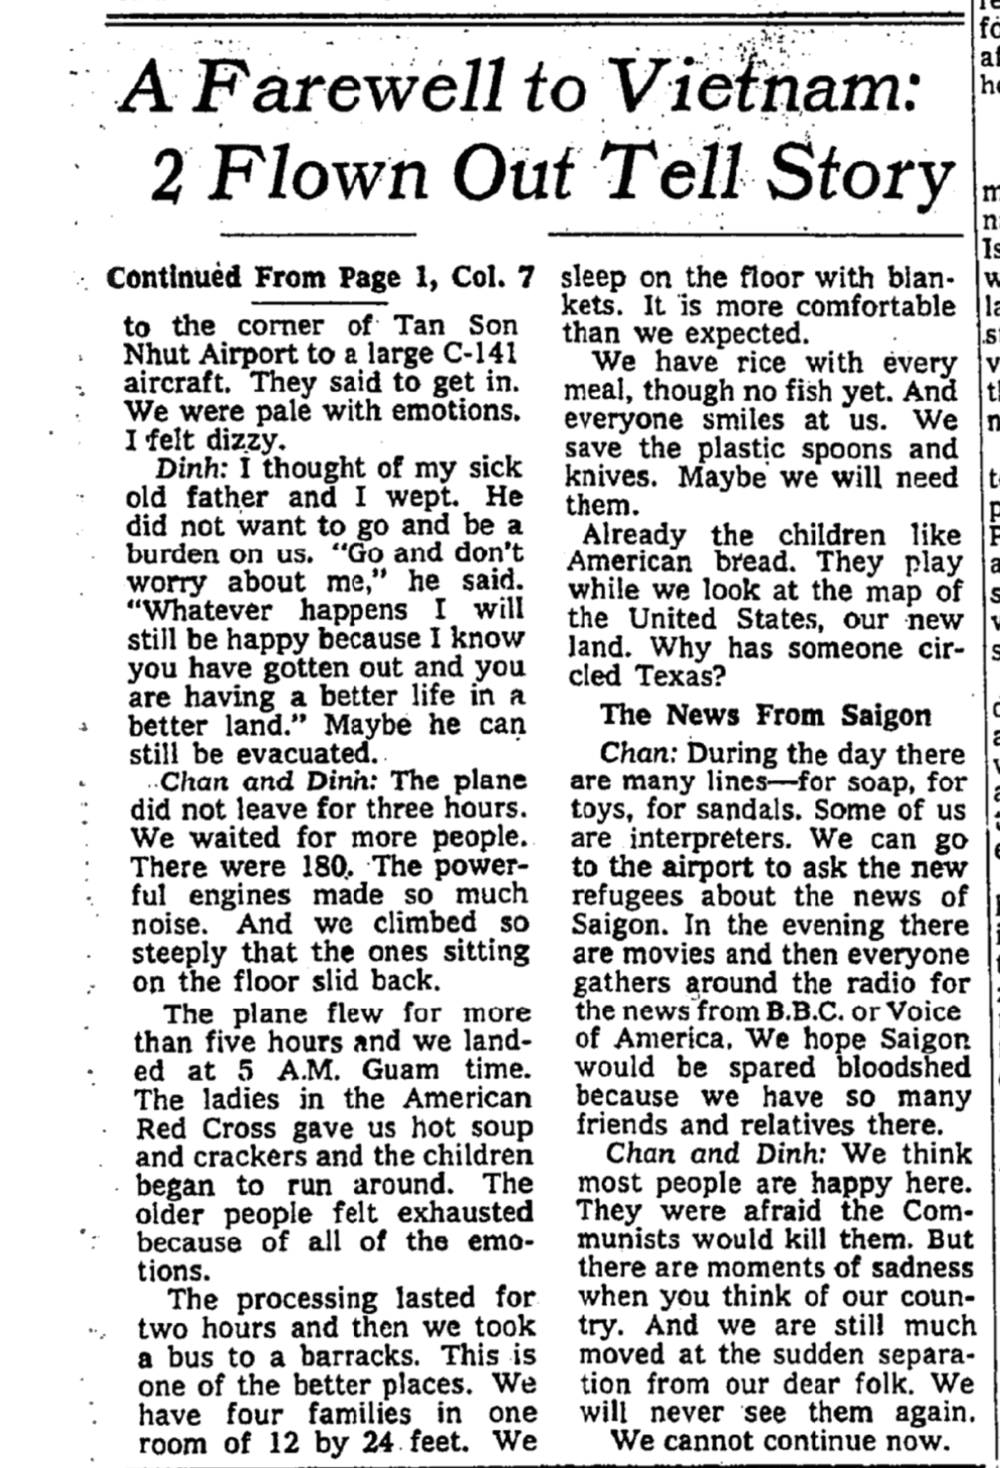 The New York Times_Apr 28, 1975_Pg.17